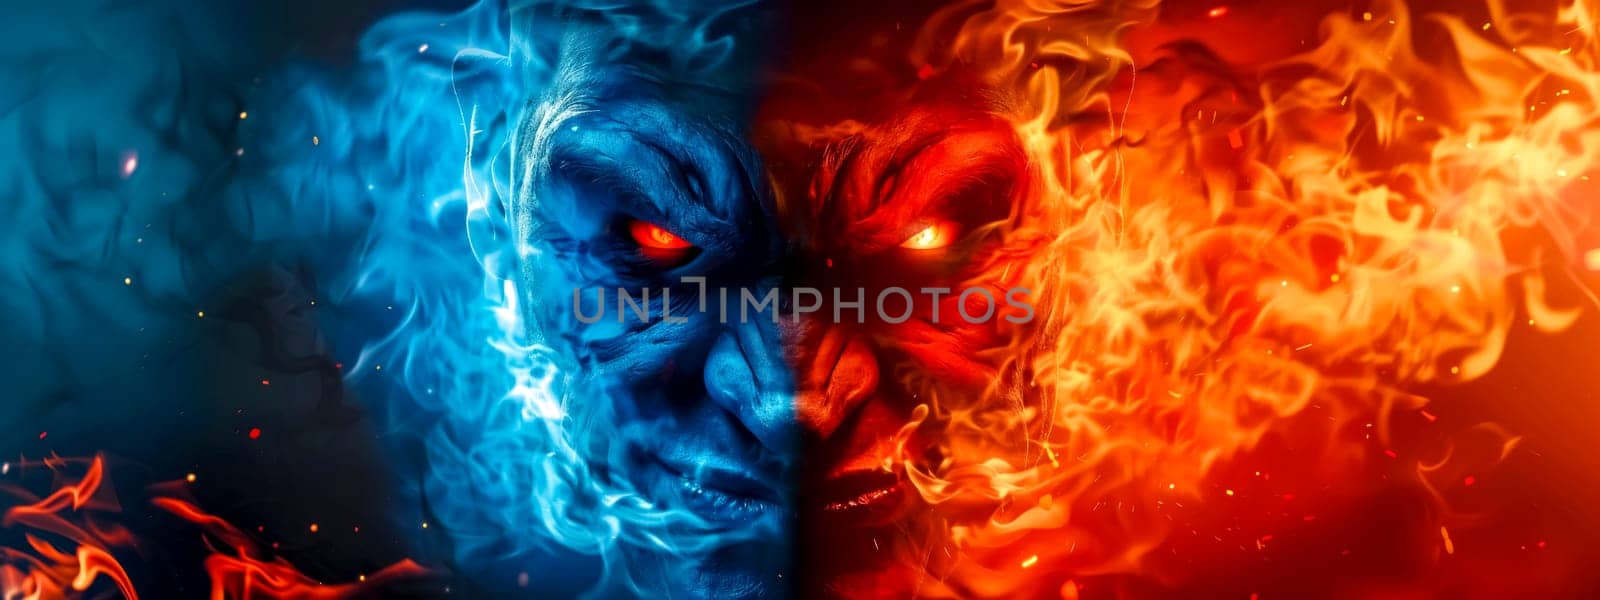 Artistic representation of elemental demons, one engulfed in flames and the other in frost